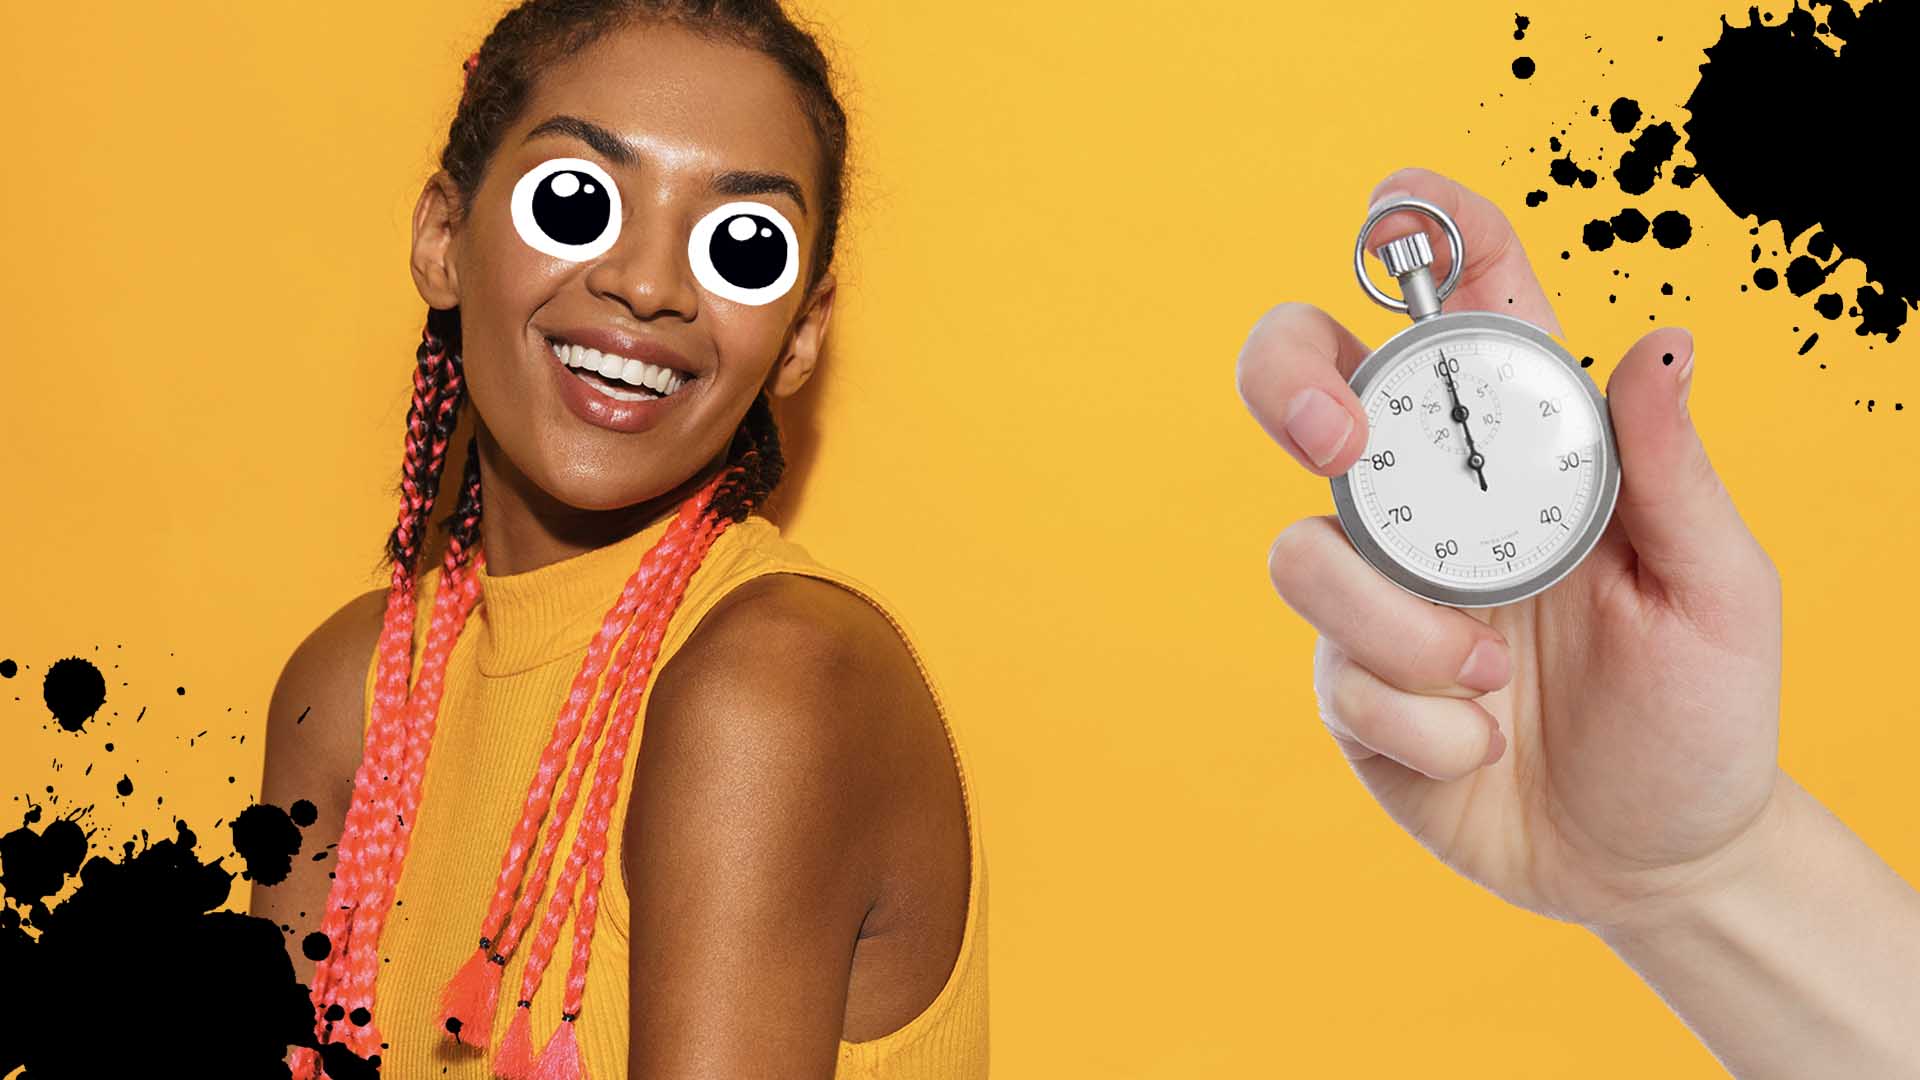 A woman and a person holding a stop watch